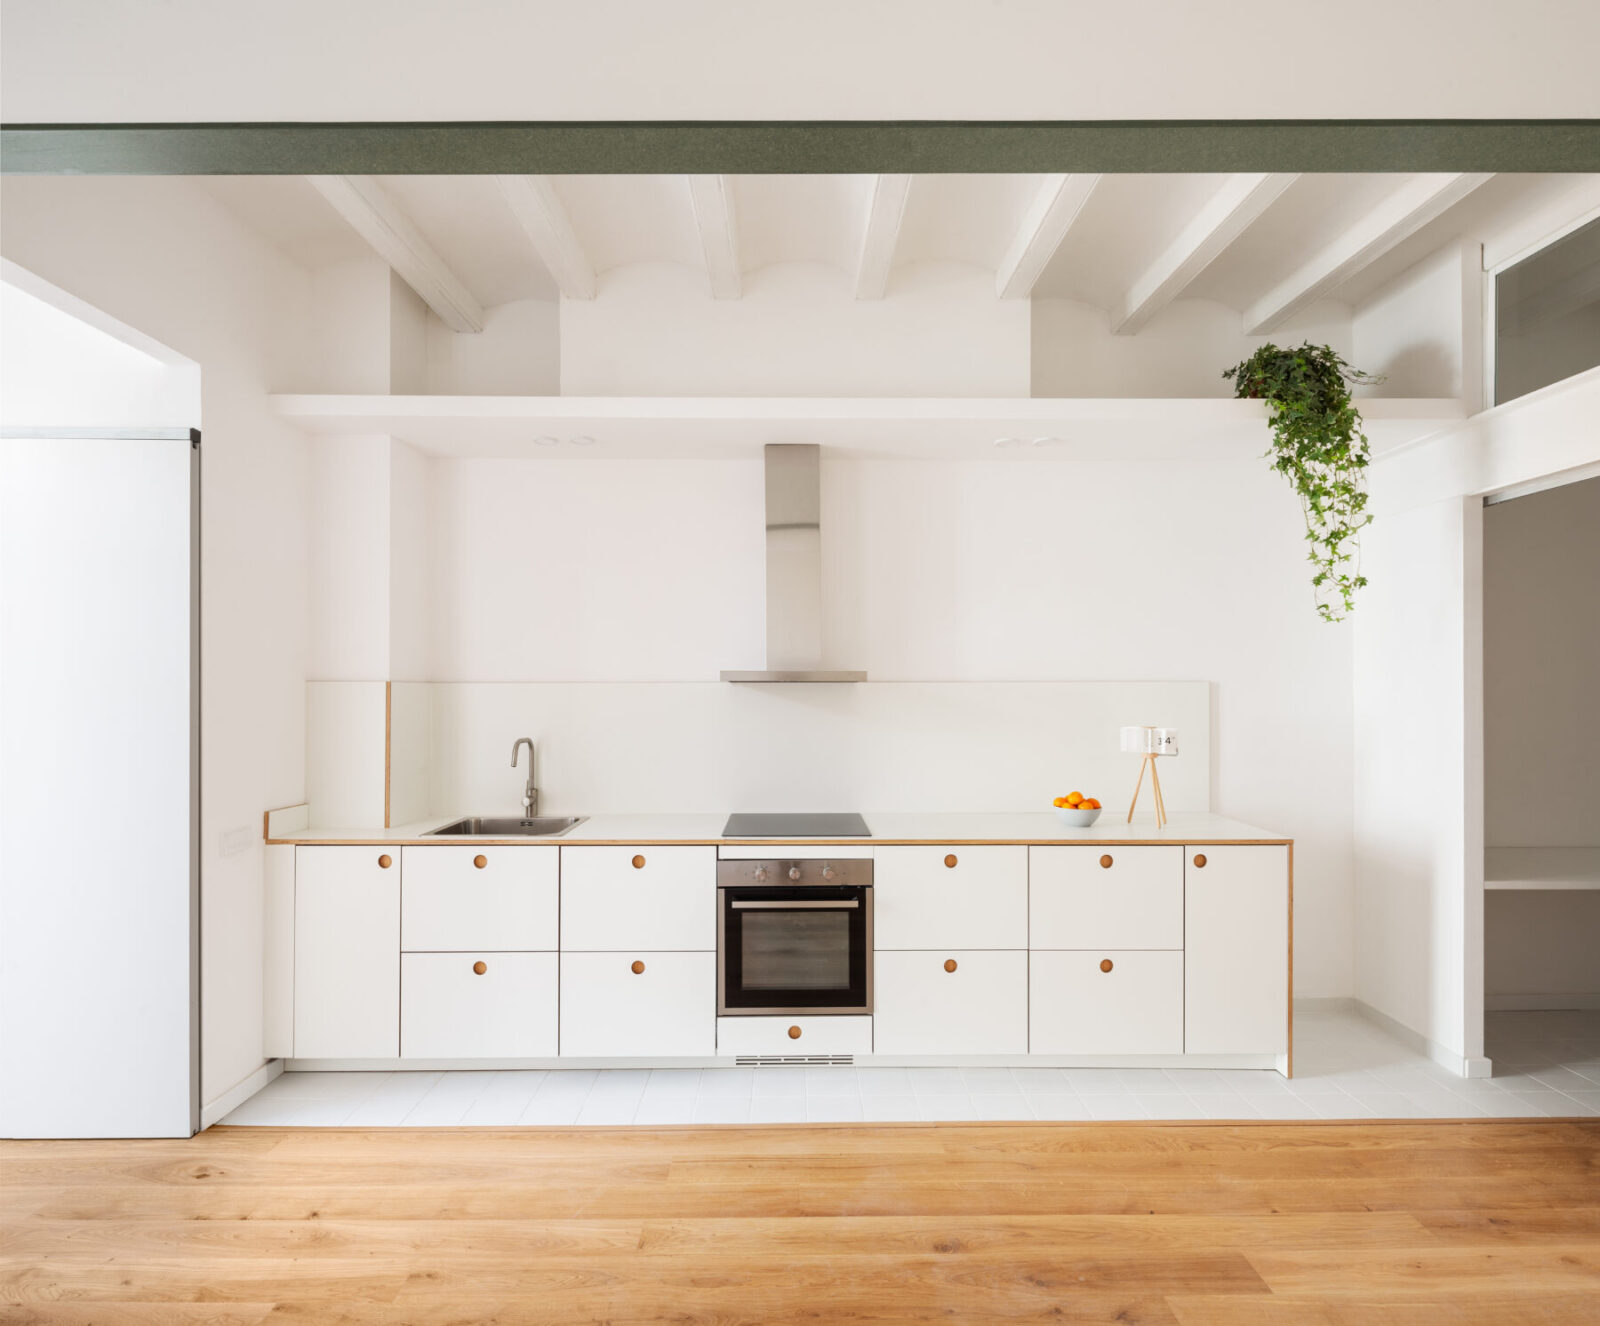 Archisearch Sants - Refurbishment of a dwelling in a century-old residential building in the Sants district, in Barcelona by midori arquitectura